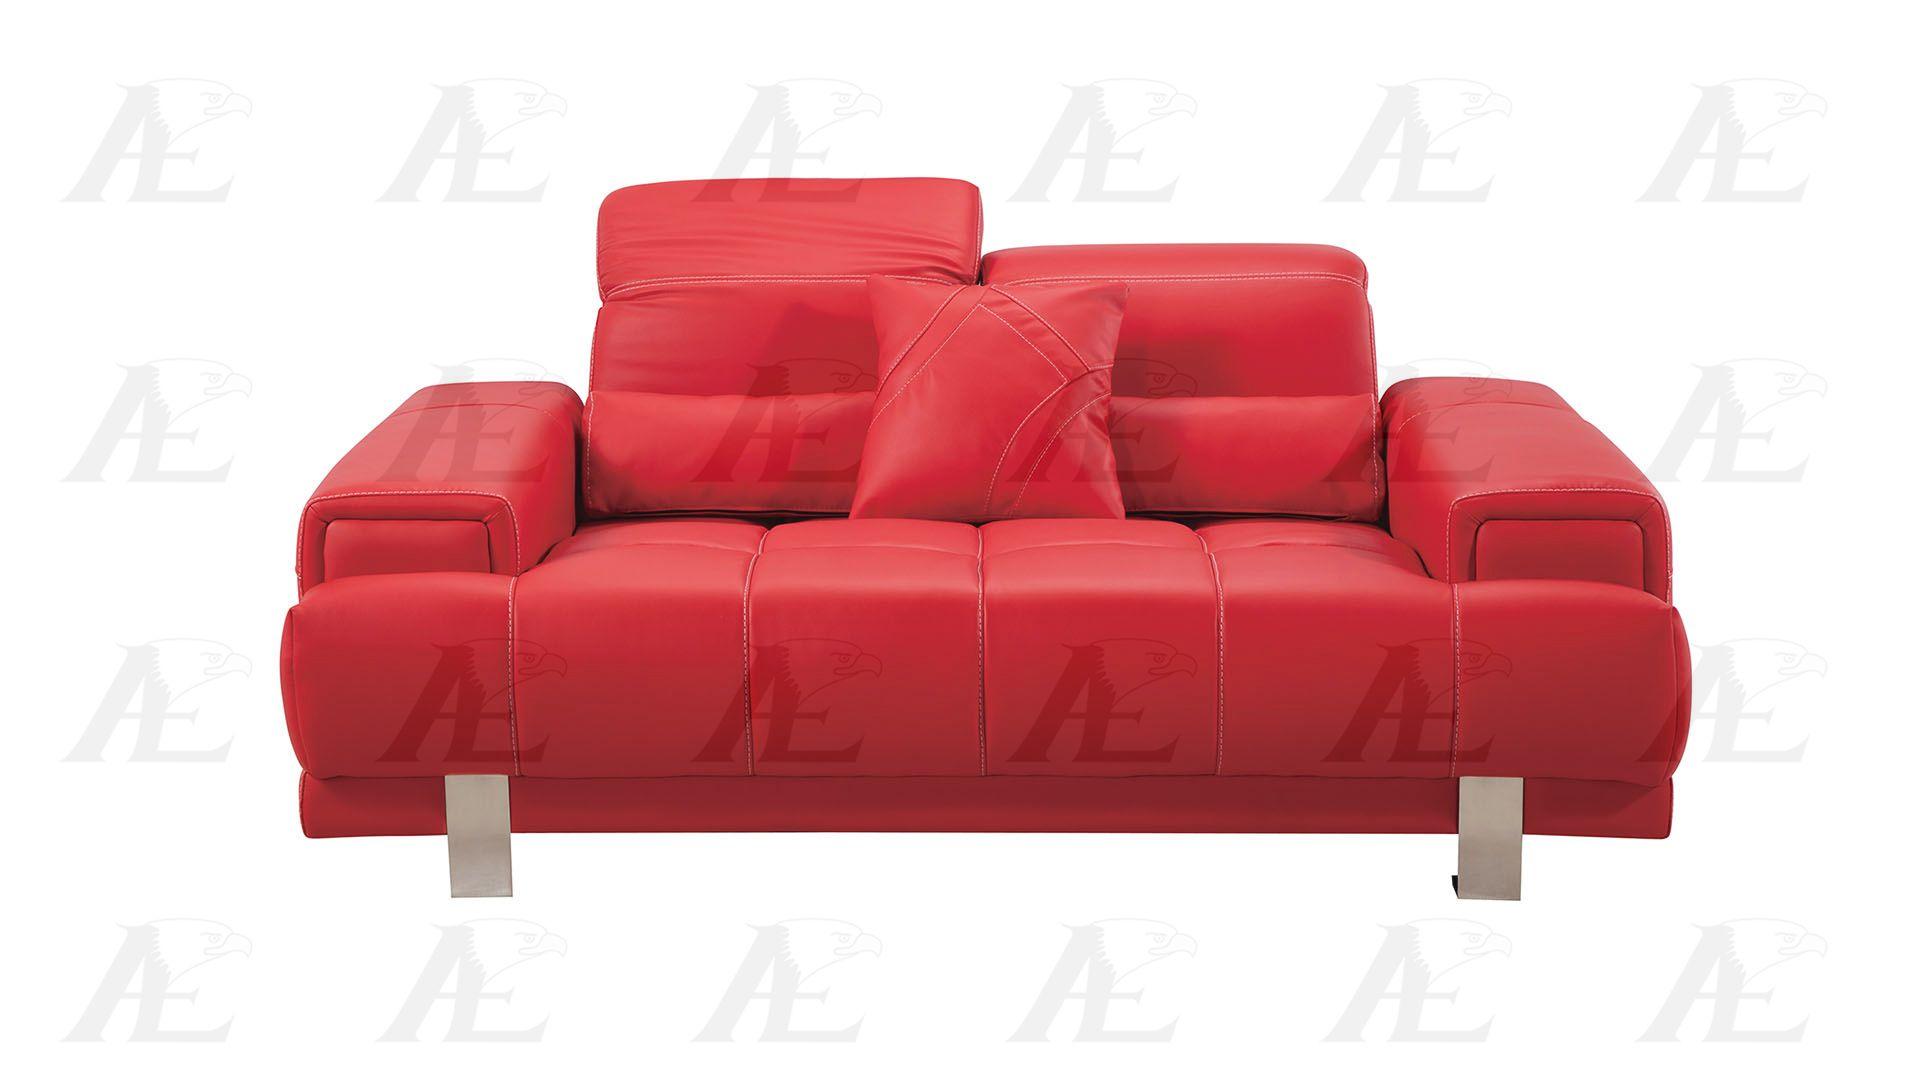 

                    
American Eagle Furniture AE606-RED Sofa and Loveseat Set Red Bonded Leather Purchase 
